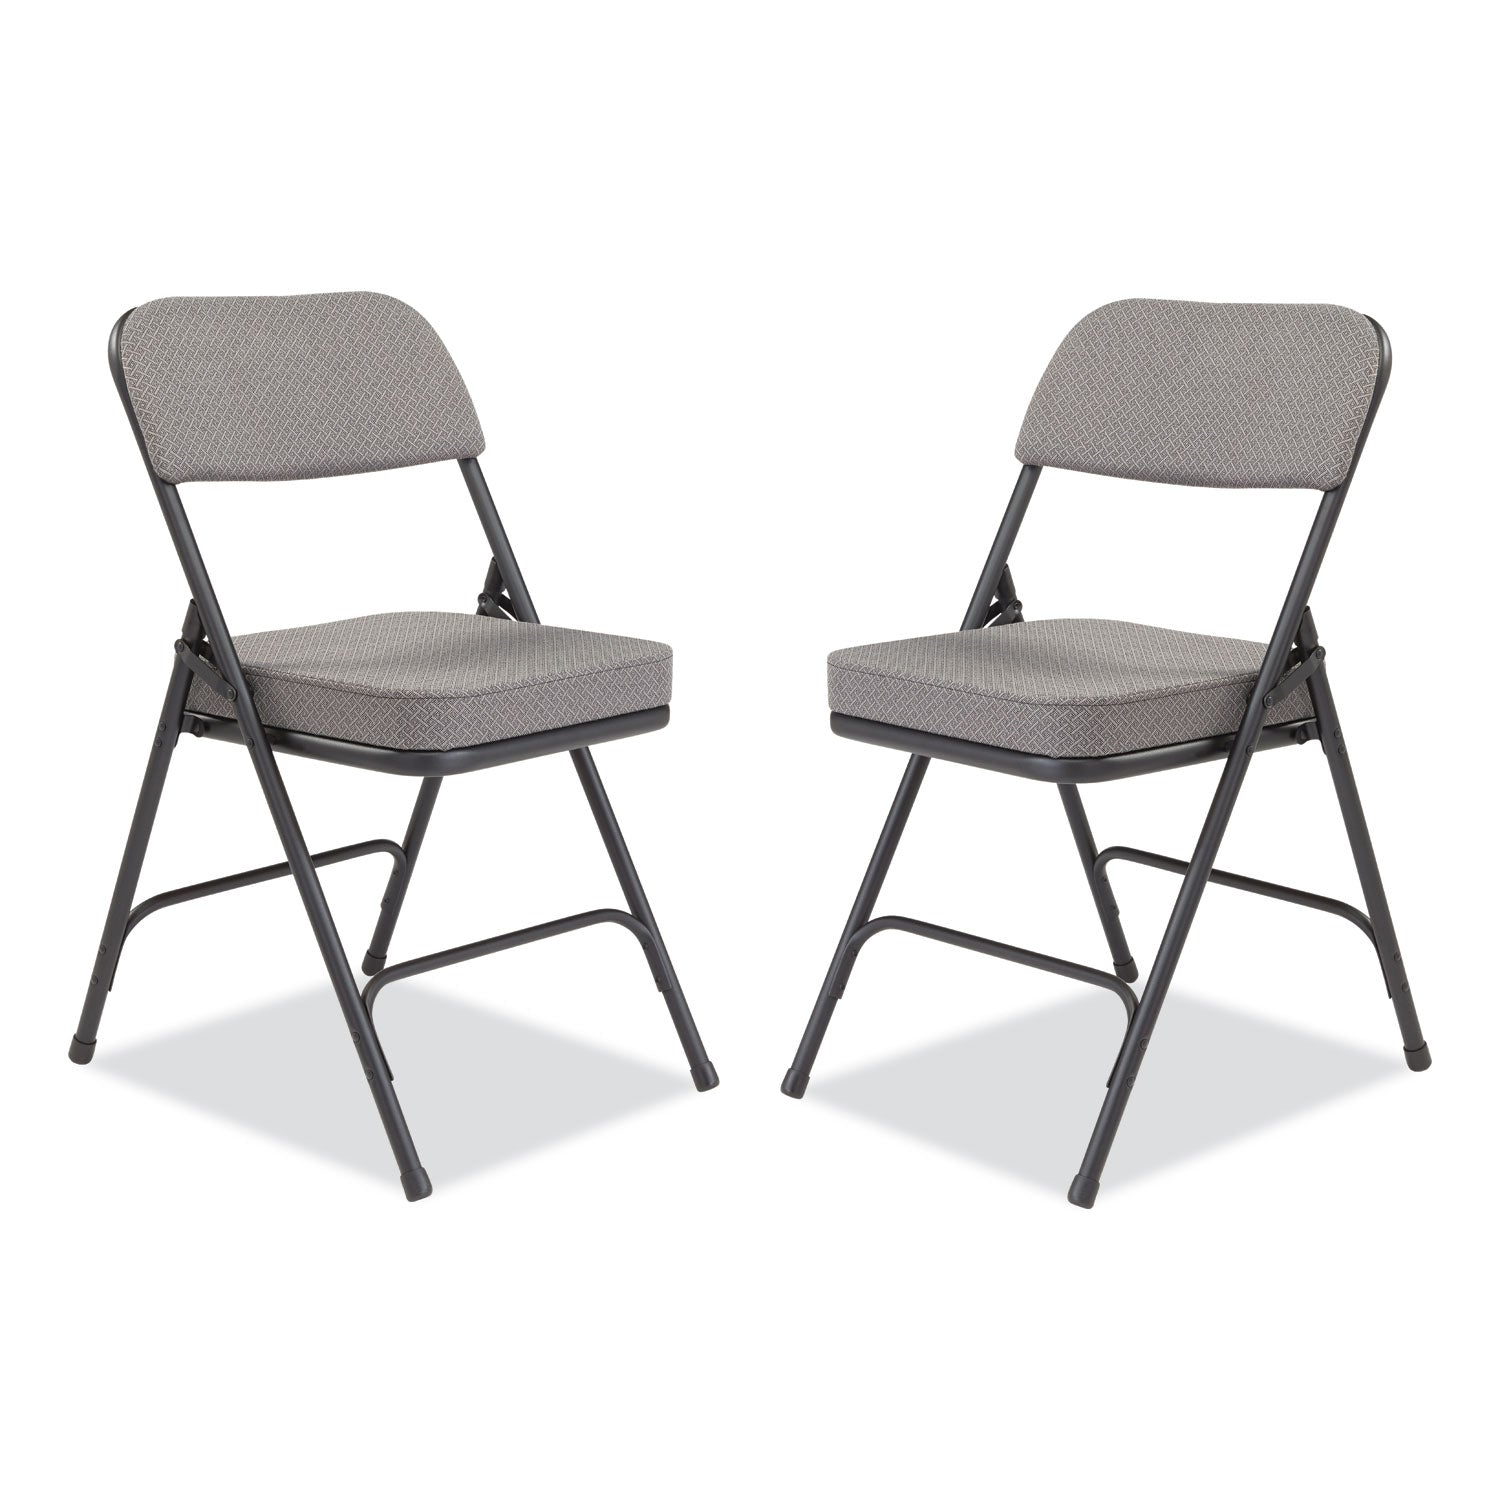 3200-series-fabric-dual-hinge-folding-chair-supports-300-lb-charcoal-seat-back-black-base-2-ct-ships-in-1-3-bus-days_nps3212 - 1